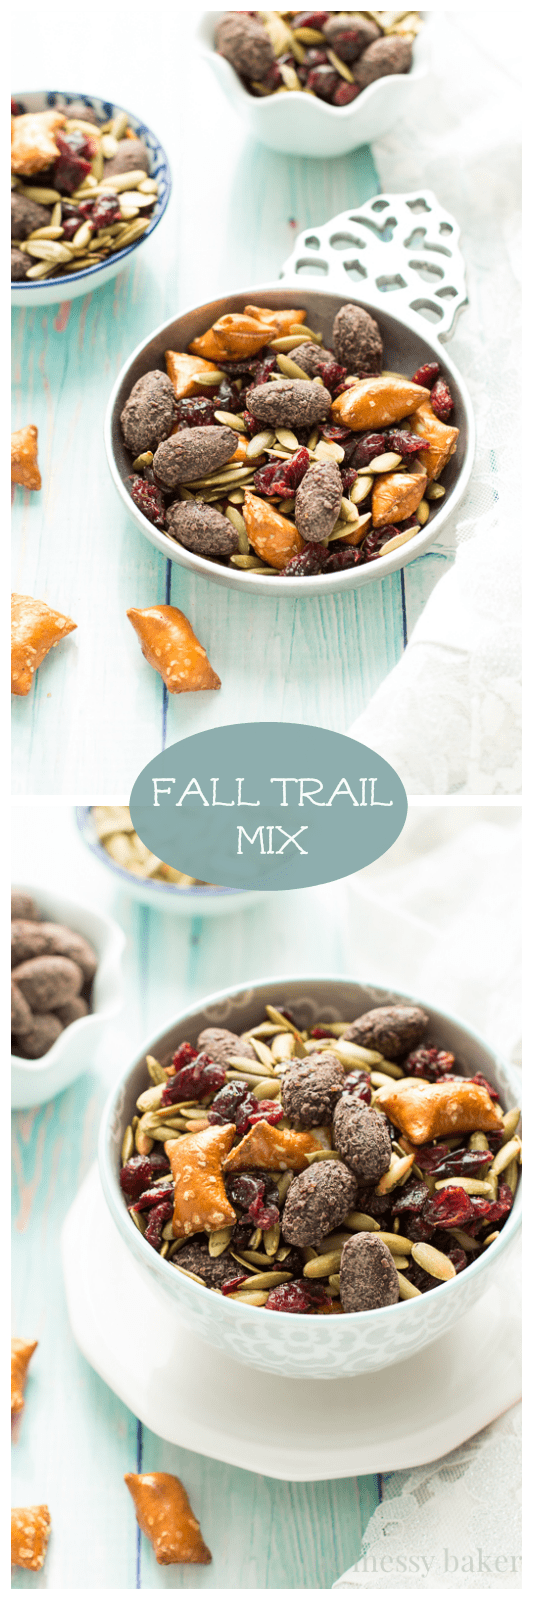 Easy Fall Trail Mix made with pumpkin seeds, dried cranberries, peanut butter filled pretzels, and dark chocolate covered almonds | www.themessybakerblog.com